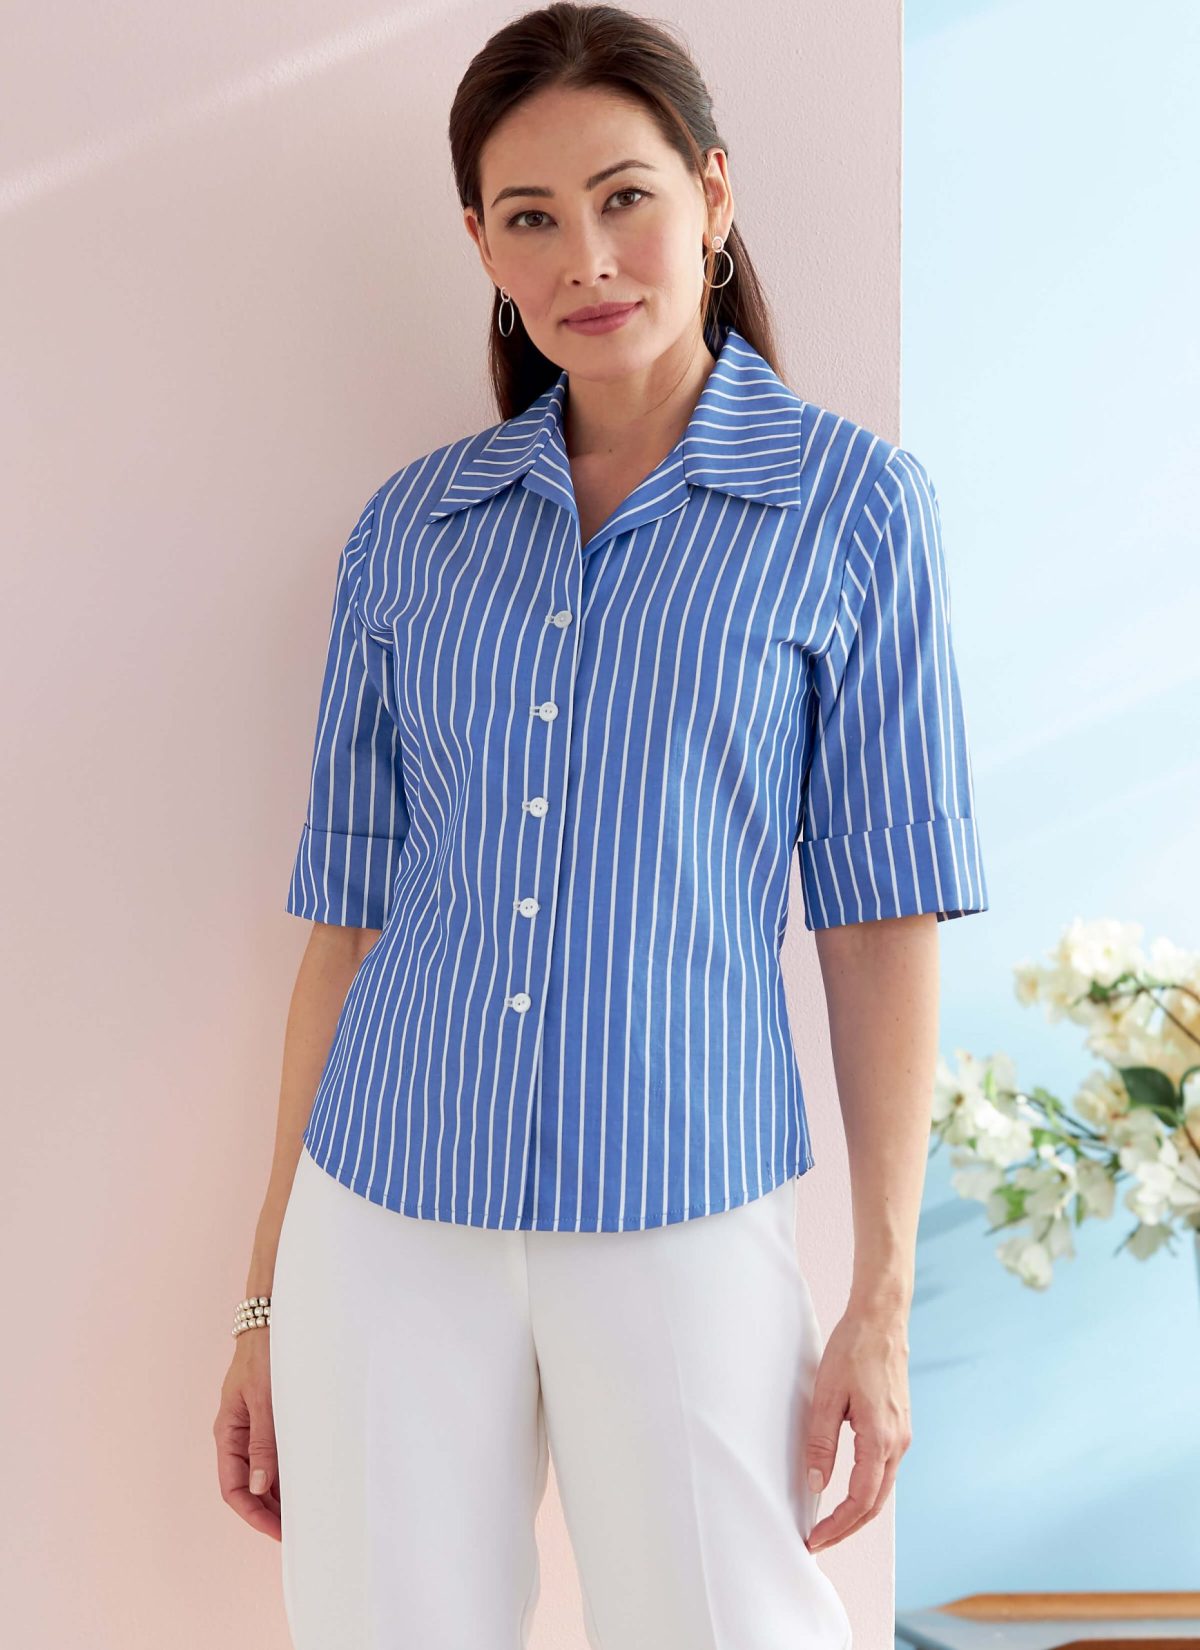 Butterick Sewing Pattern B6753 Misses'/Misses' Petite Button-Down Shirts